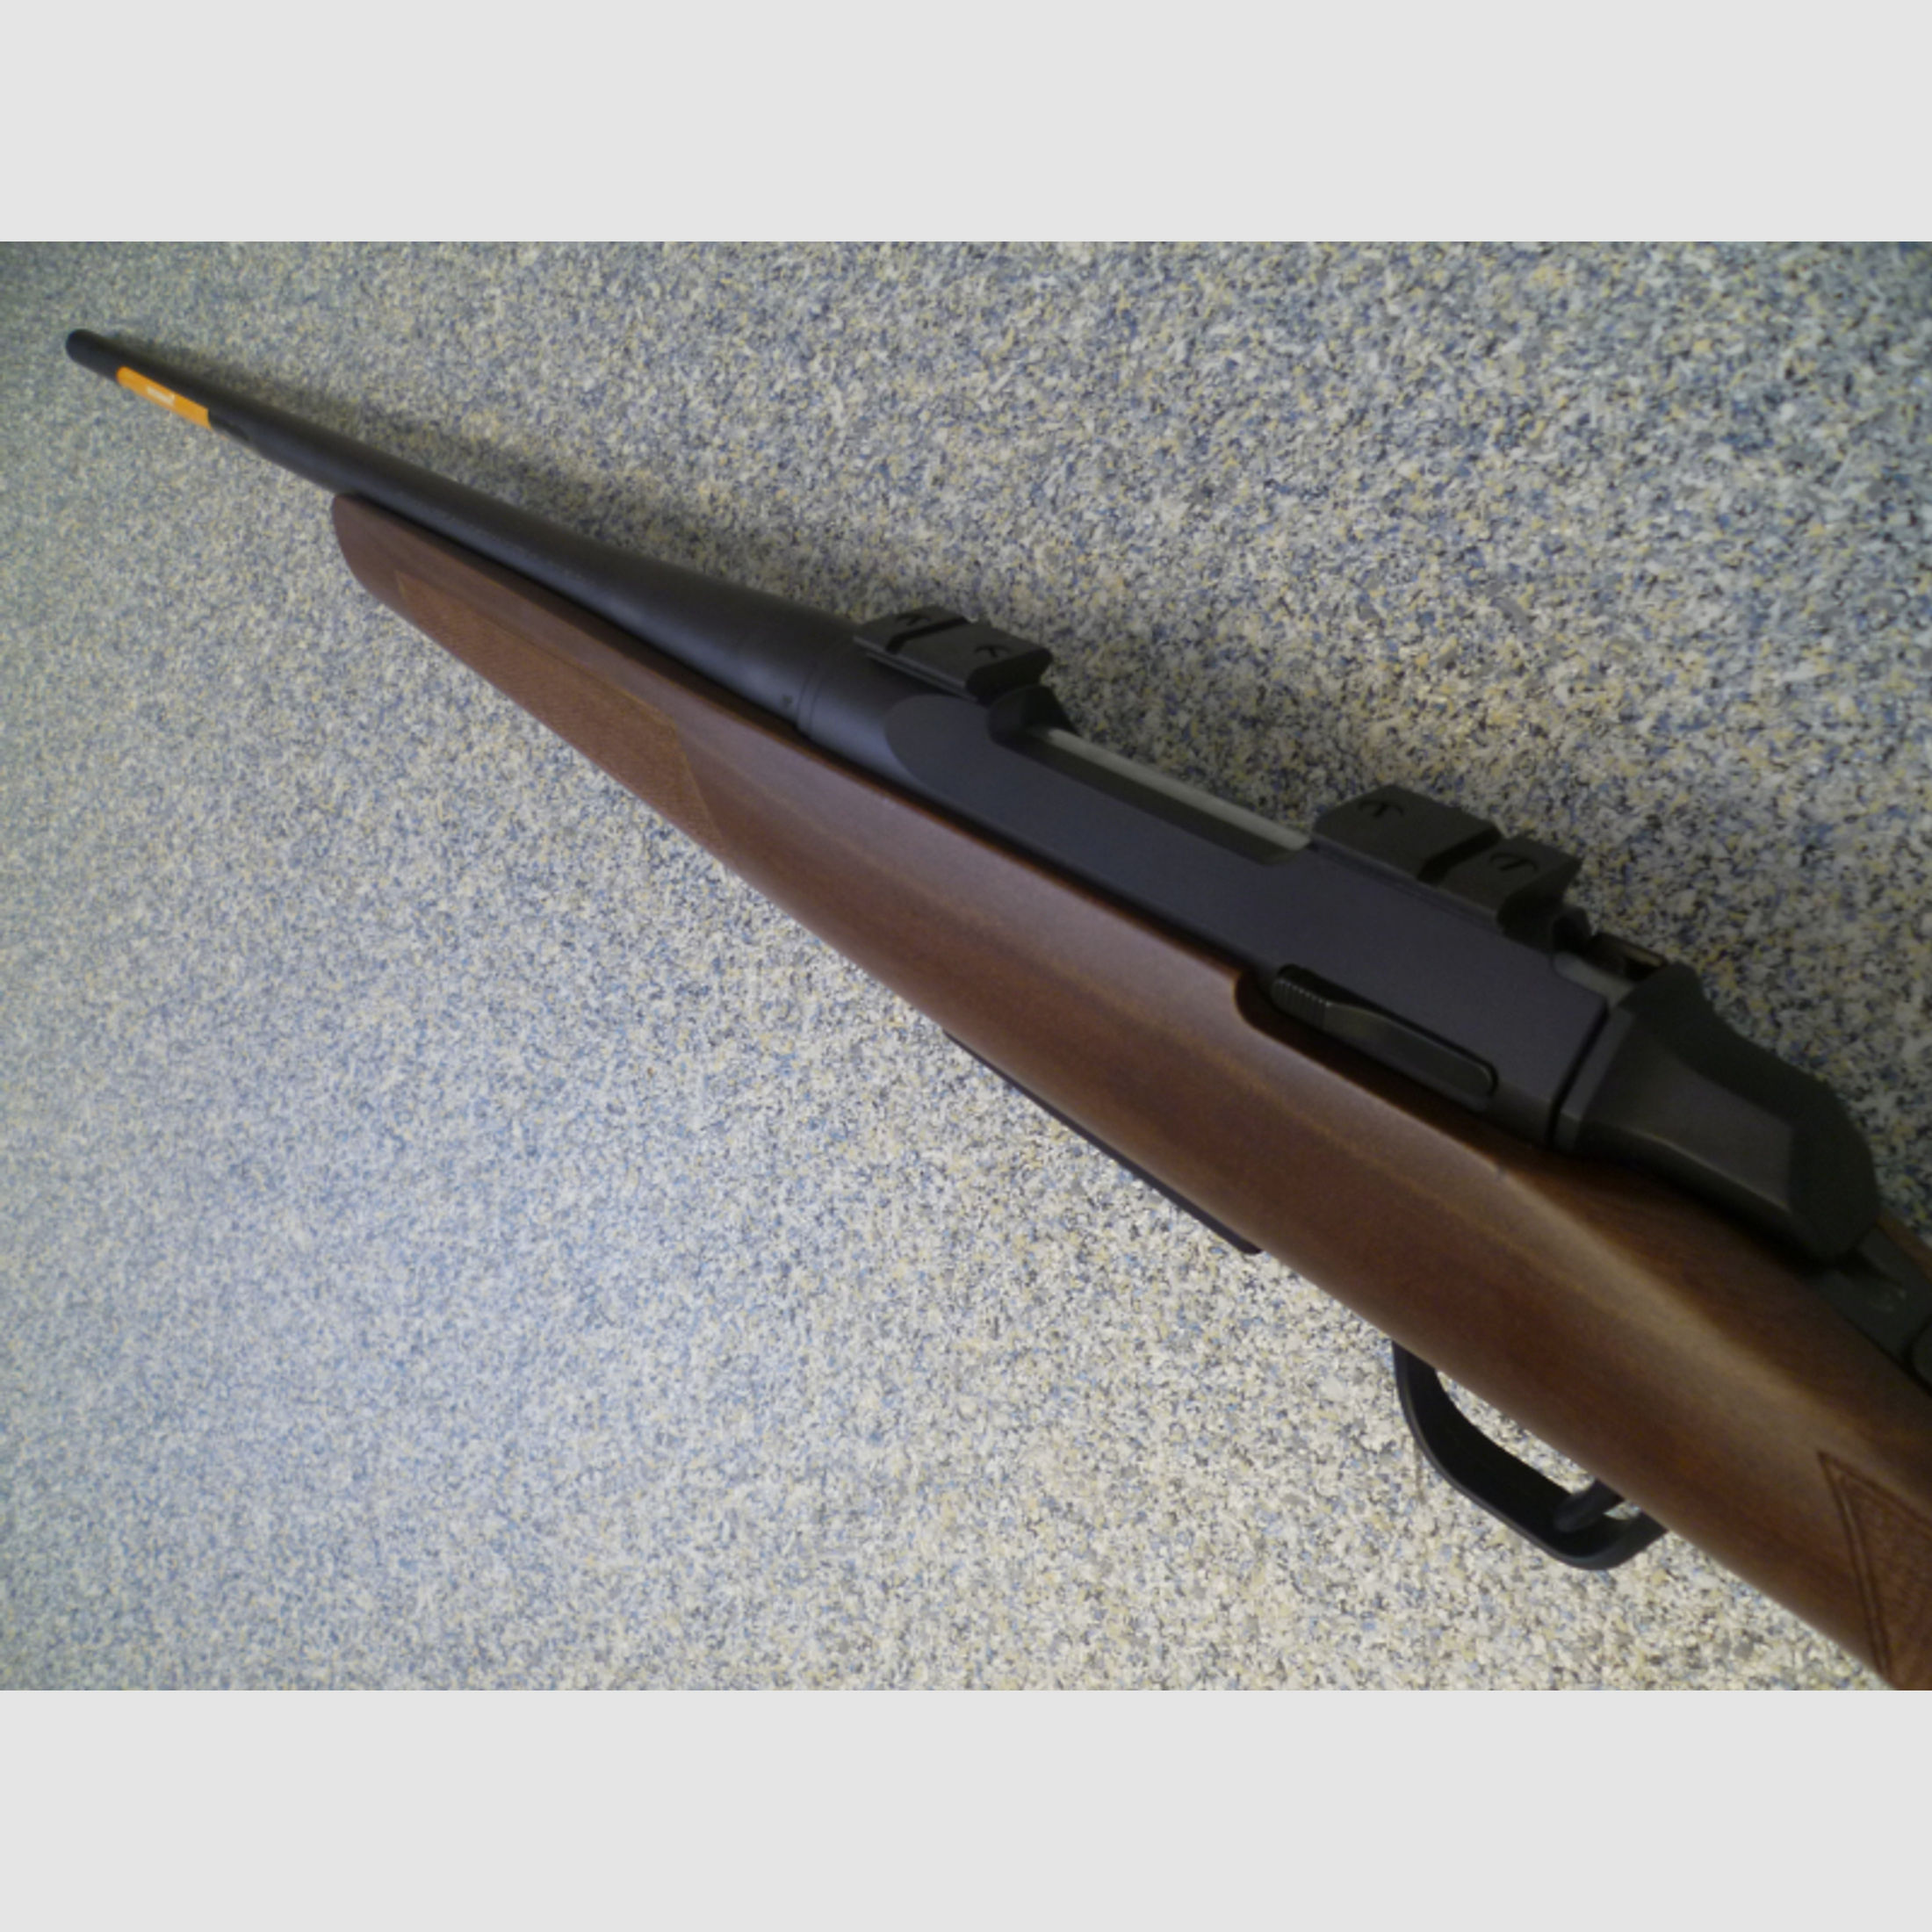 Repetierbüchse Browning A-Bolt .308 Win.